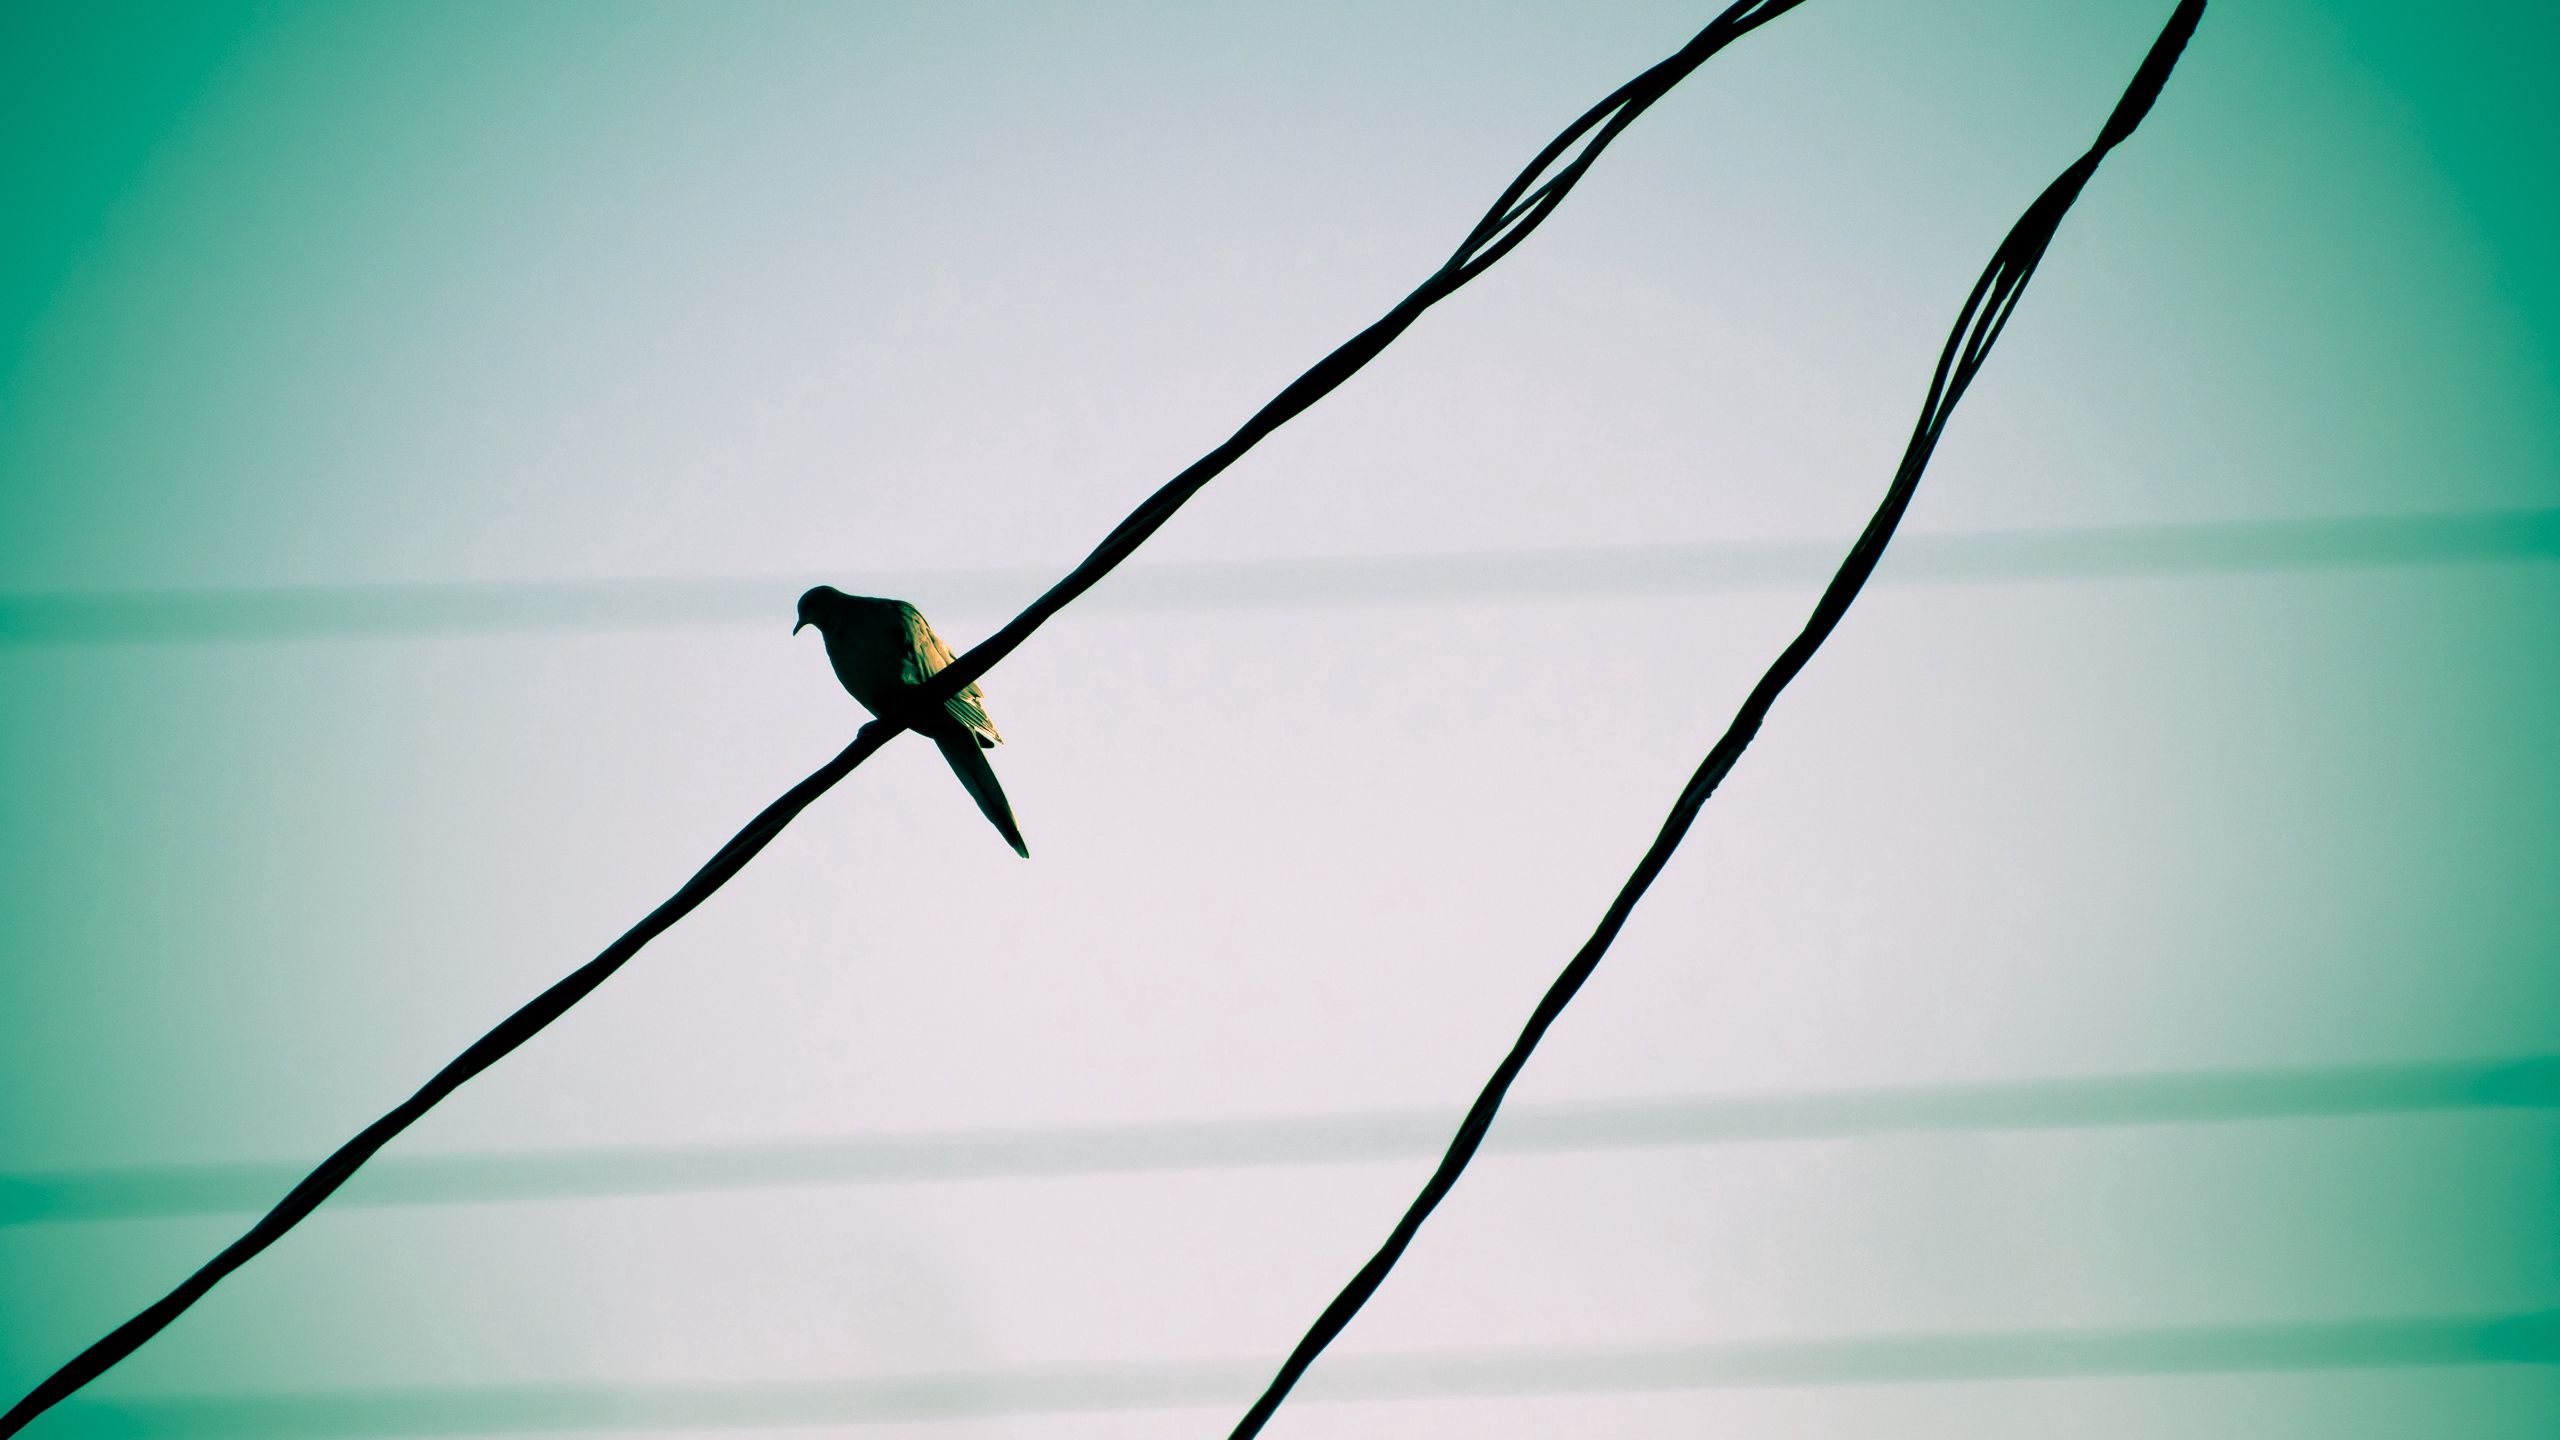 wires, animals, sky, bird, wire, expectation, waiting